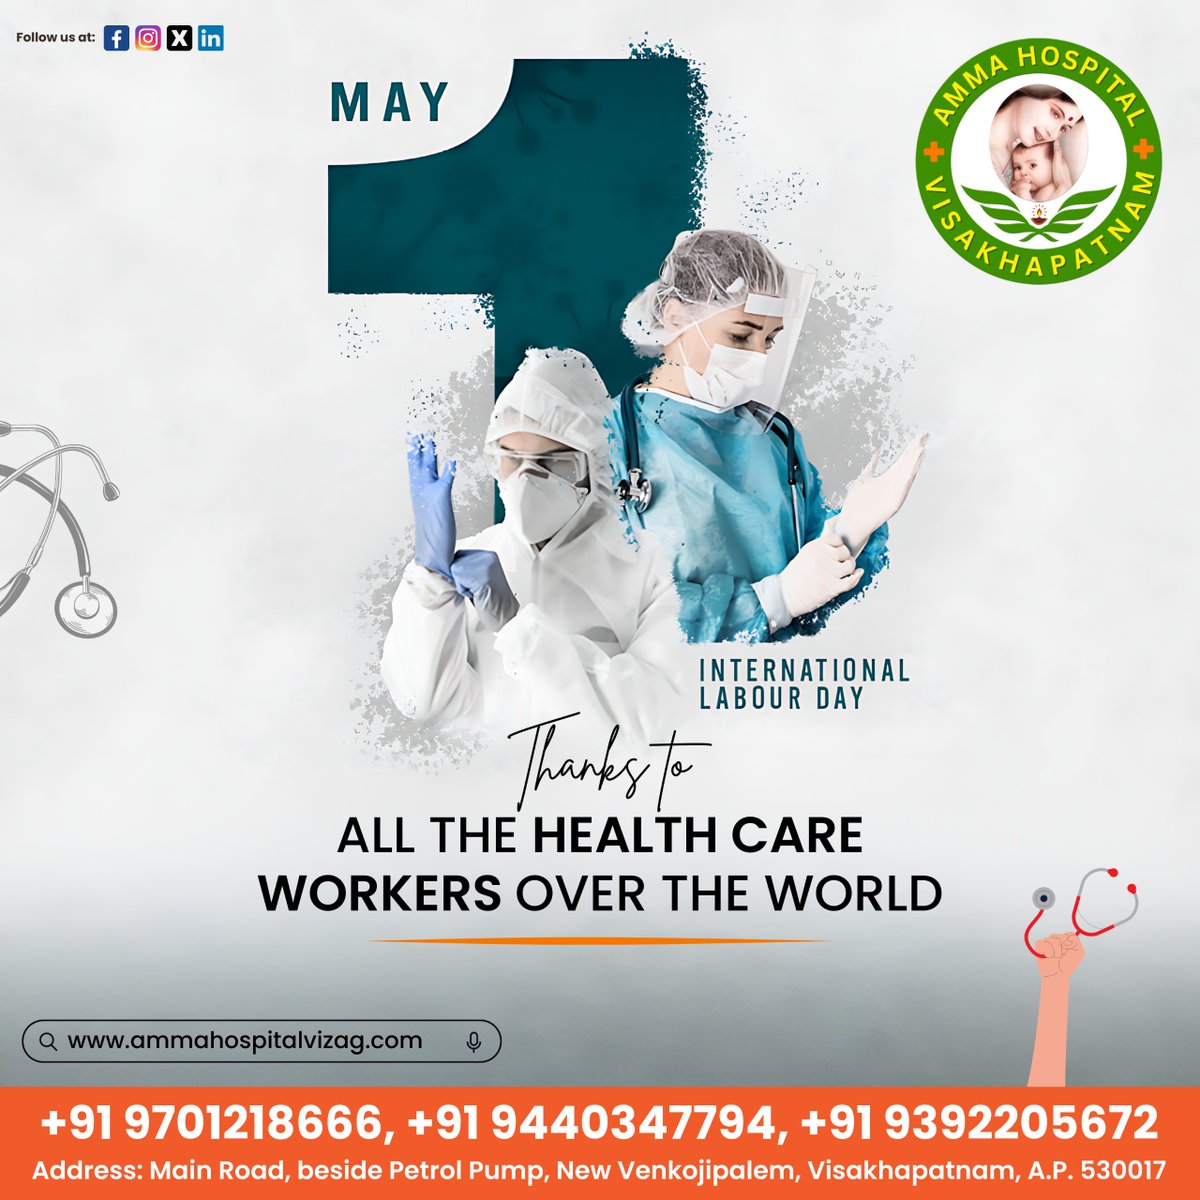 May International Labour Day
Celebrating the hard work & dedication of those who turn impossible to possible.

Contacts : +91 9515888591 | +91 9392051992 

#AmmaHospital #BestFertilityDoctor #BestGynaecologyHospital #BestOrthopedicHospital #GynaecologyDoctor #BestHospitalinVizag